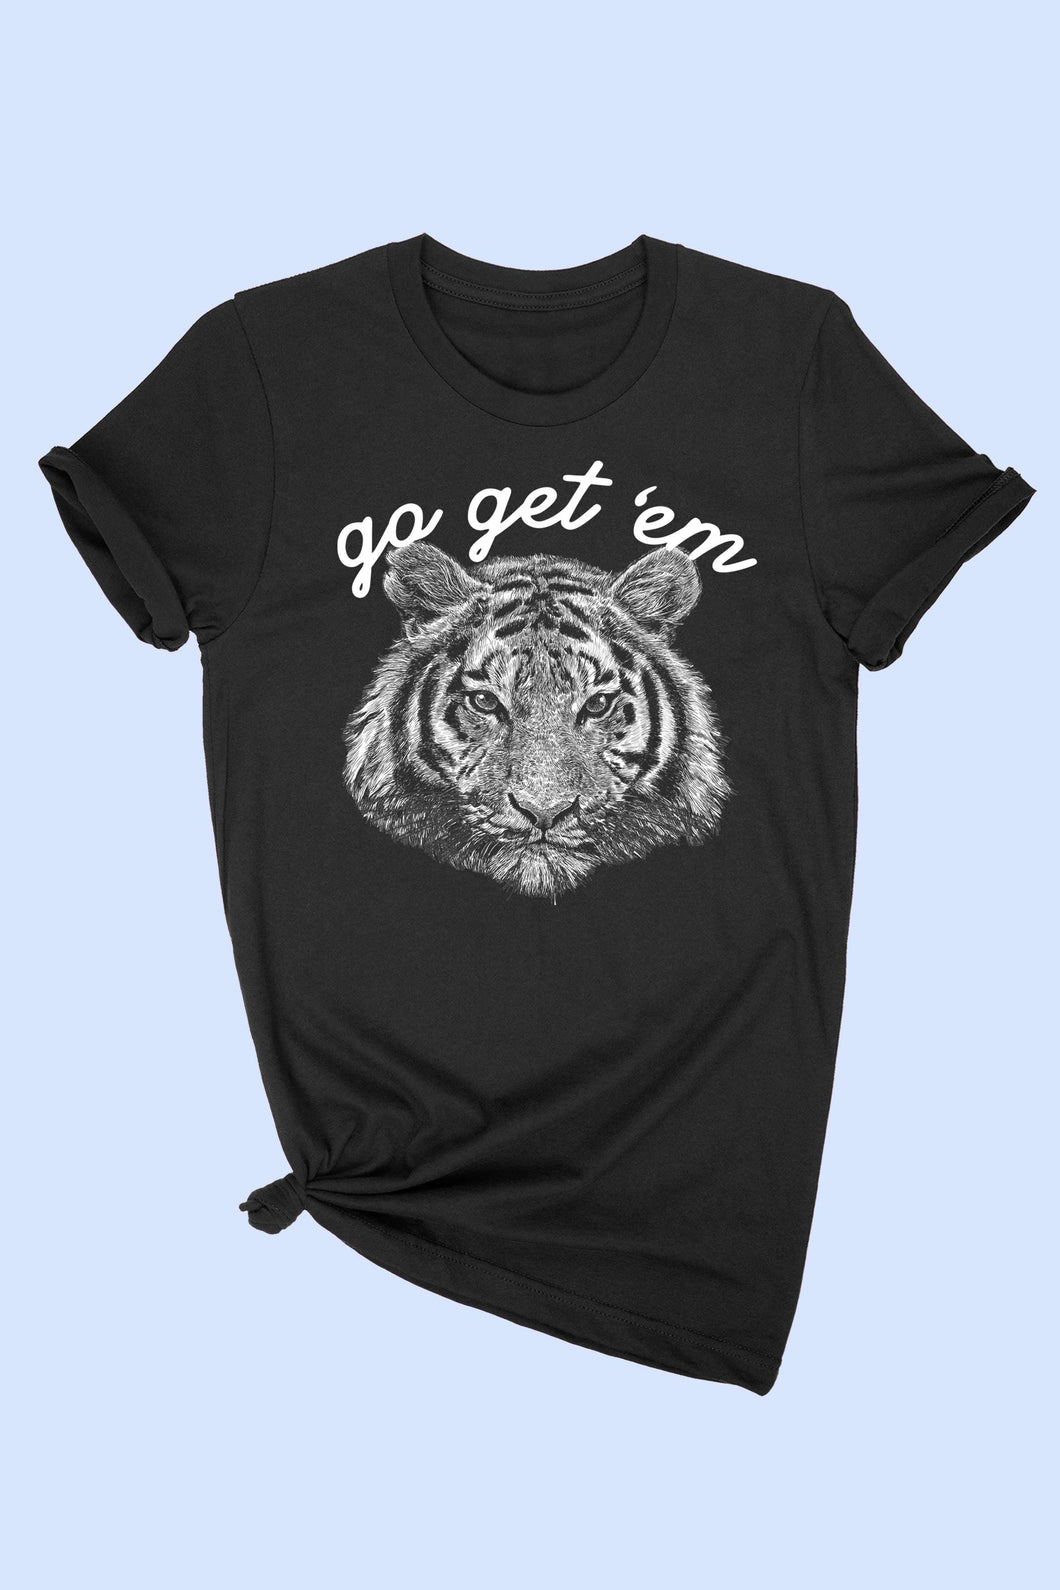 Youth Get Em Tiger Graphic Tee